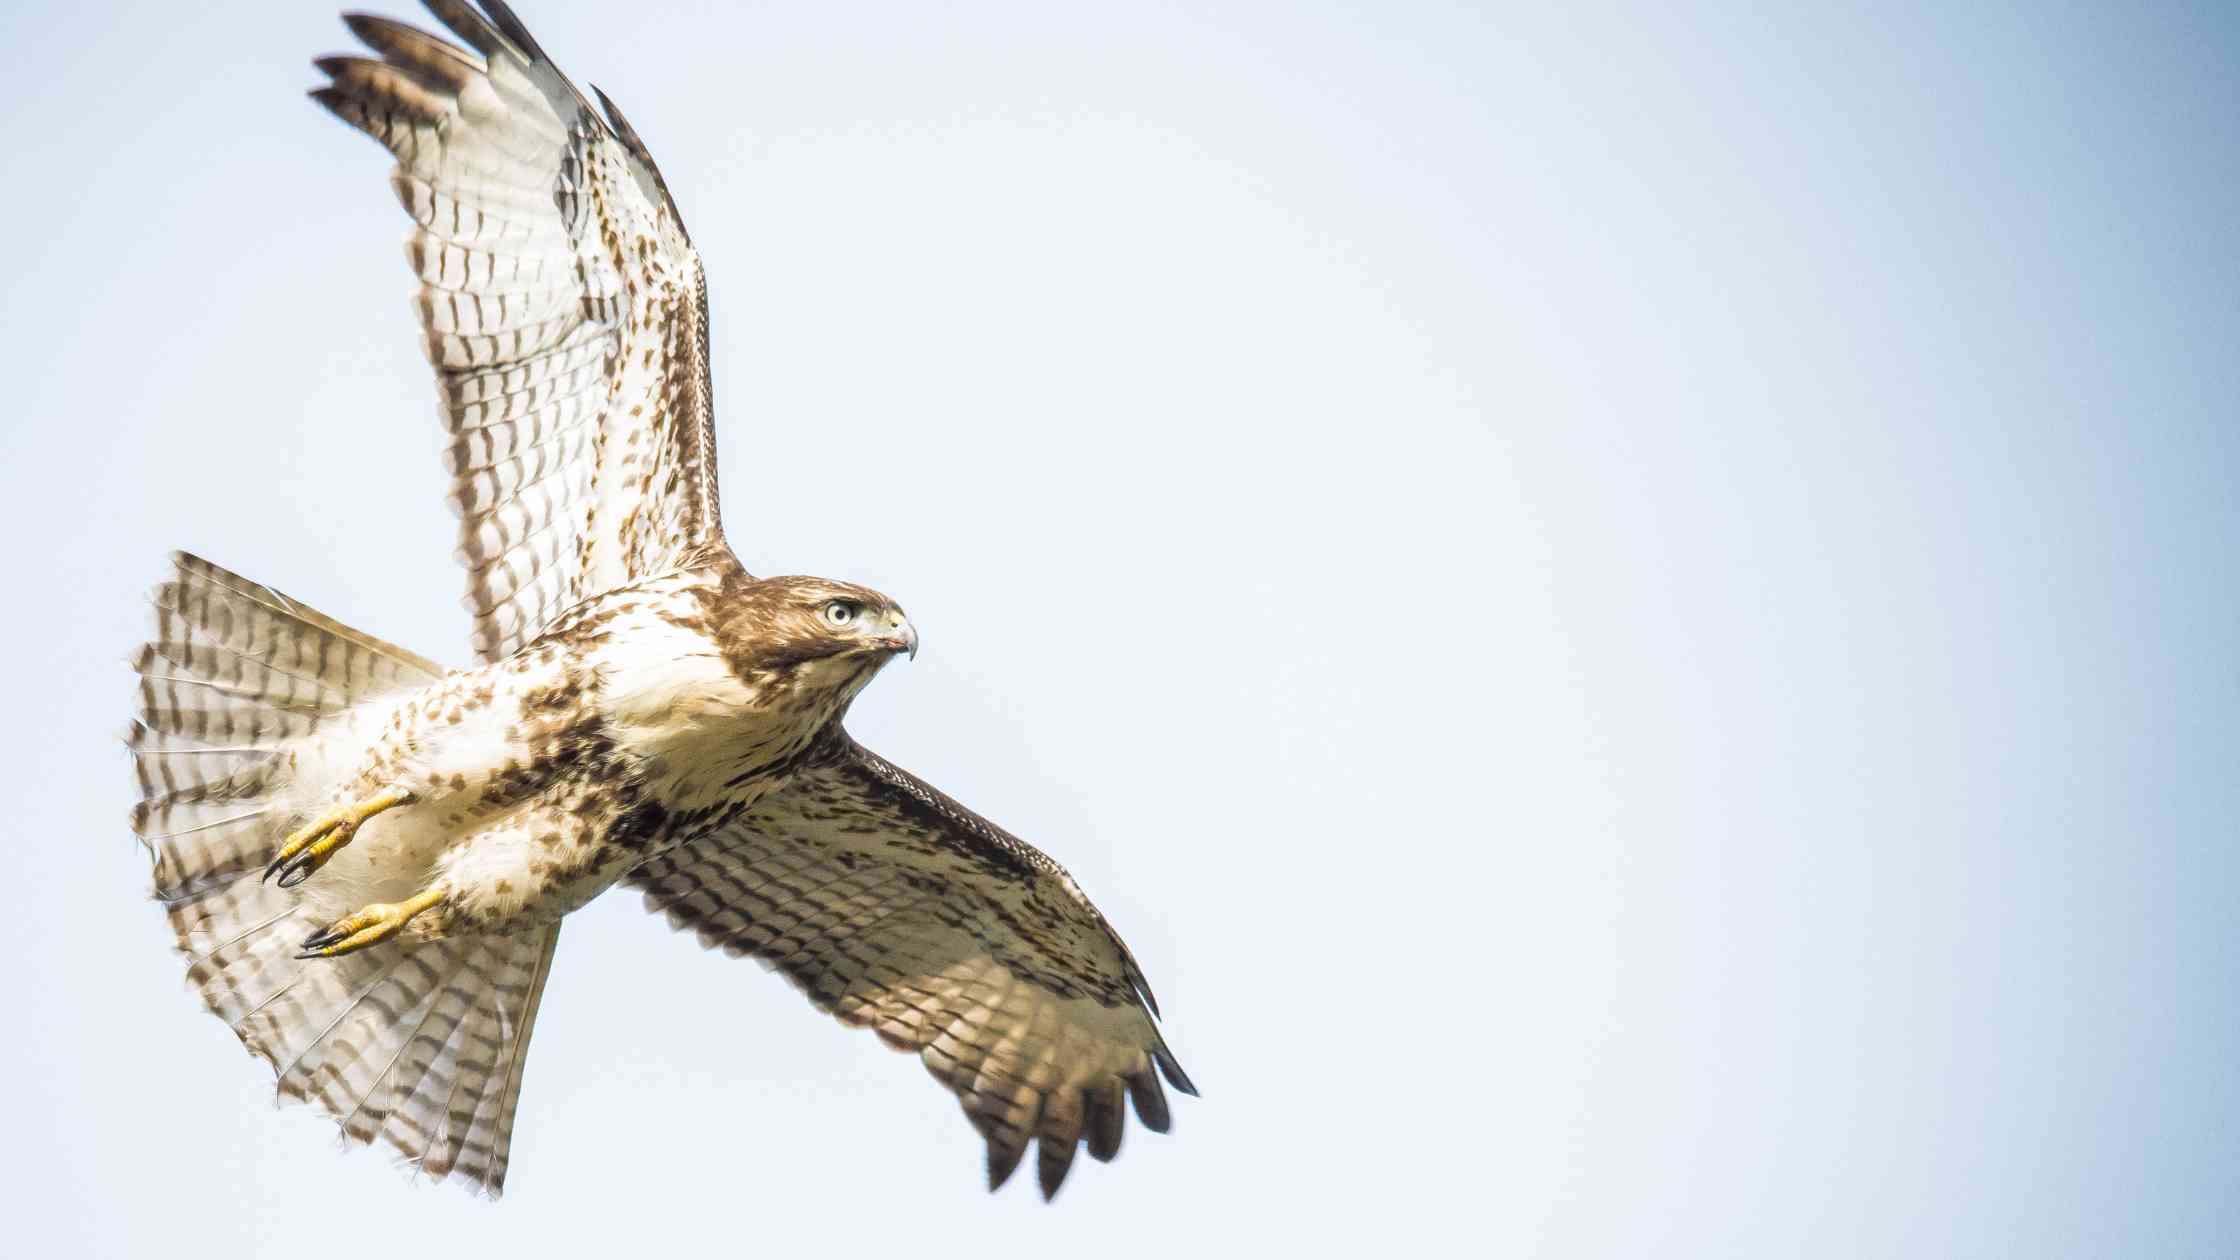 biblical meaning of seeing a hawk